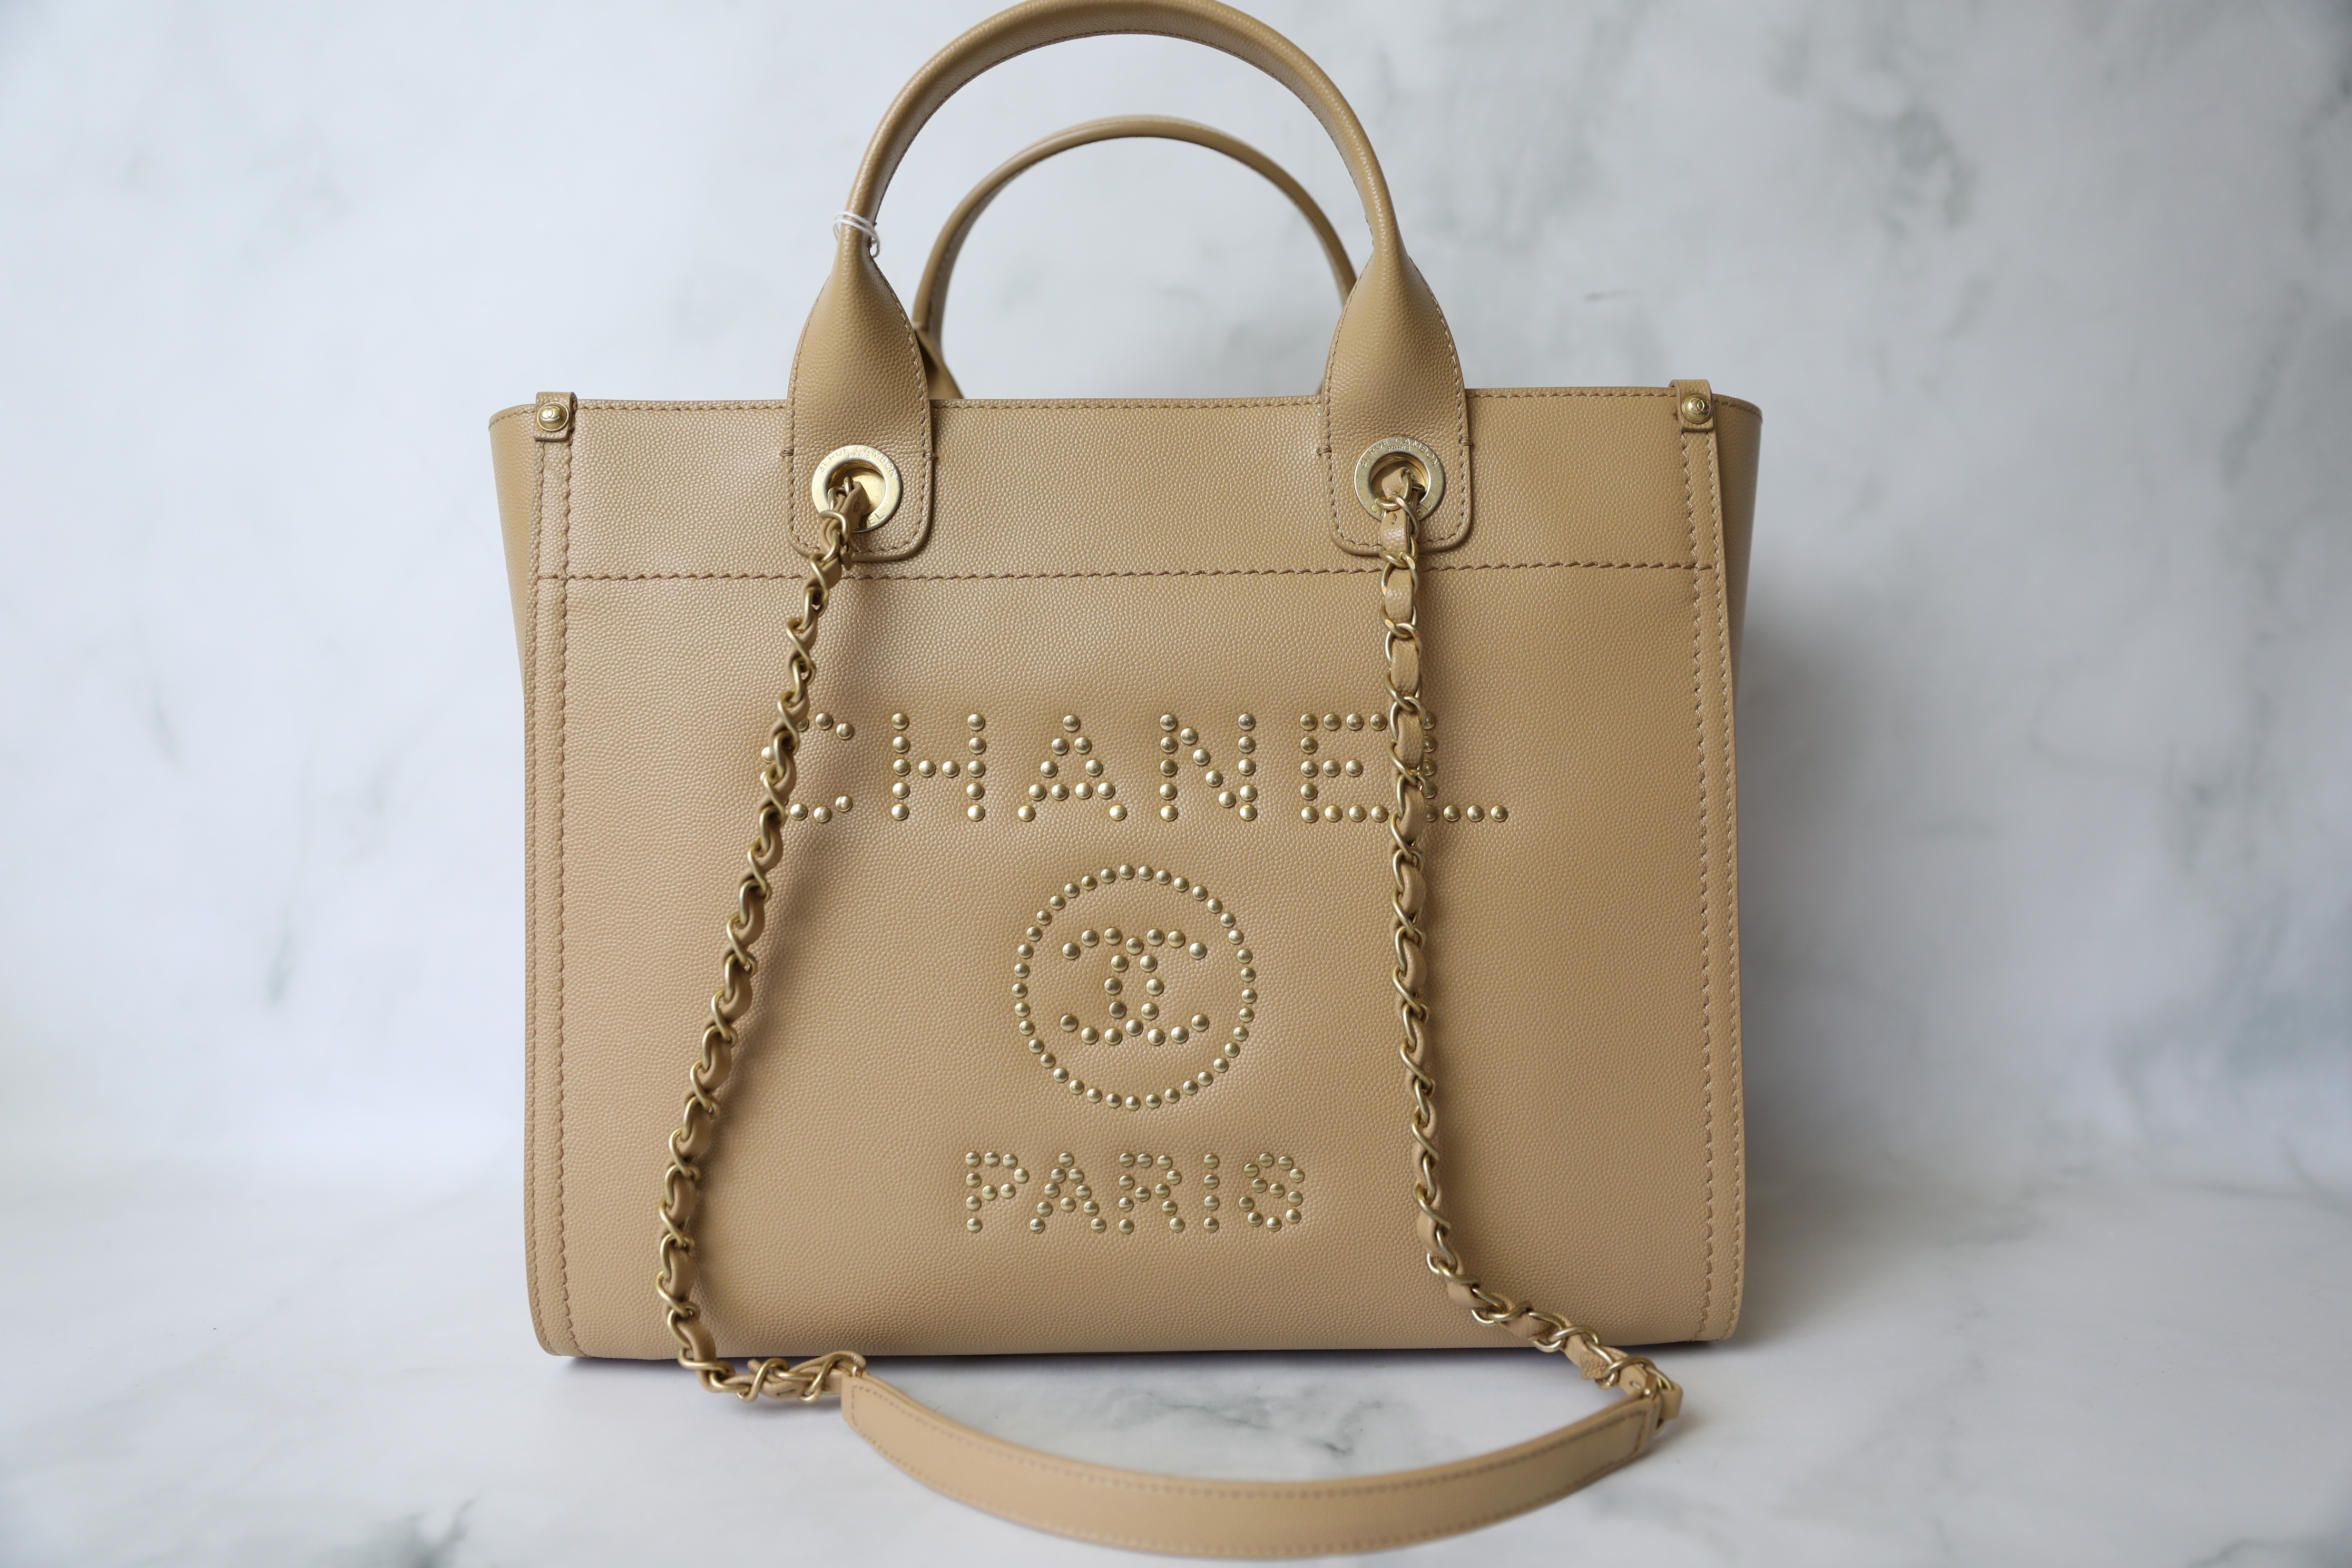 Chanel Deauville Small, Beige Caviar Leather with Gold Hardware